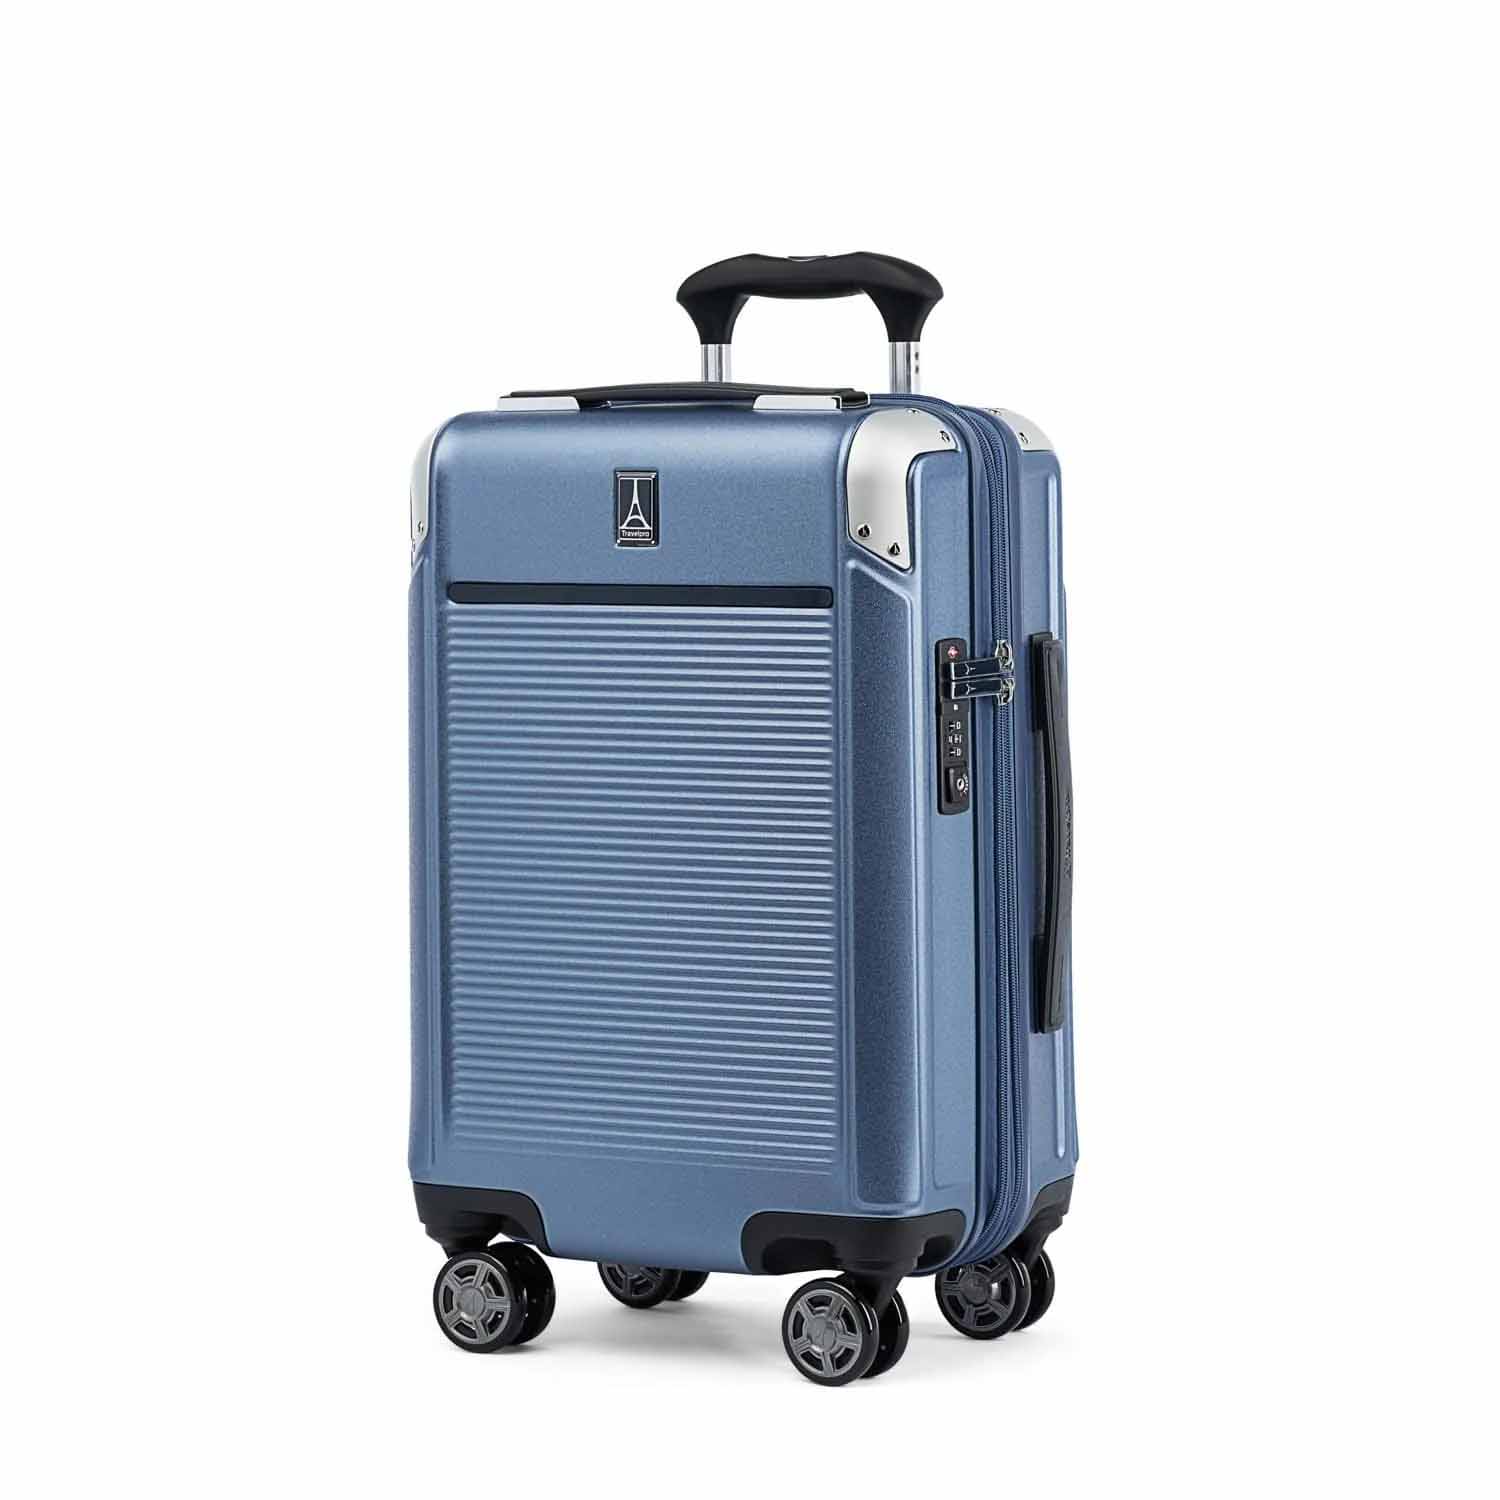 Travelpro Platinum Elite Expandable Carry-On Spinner in blue